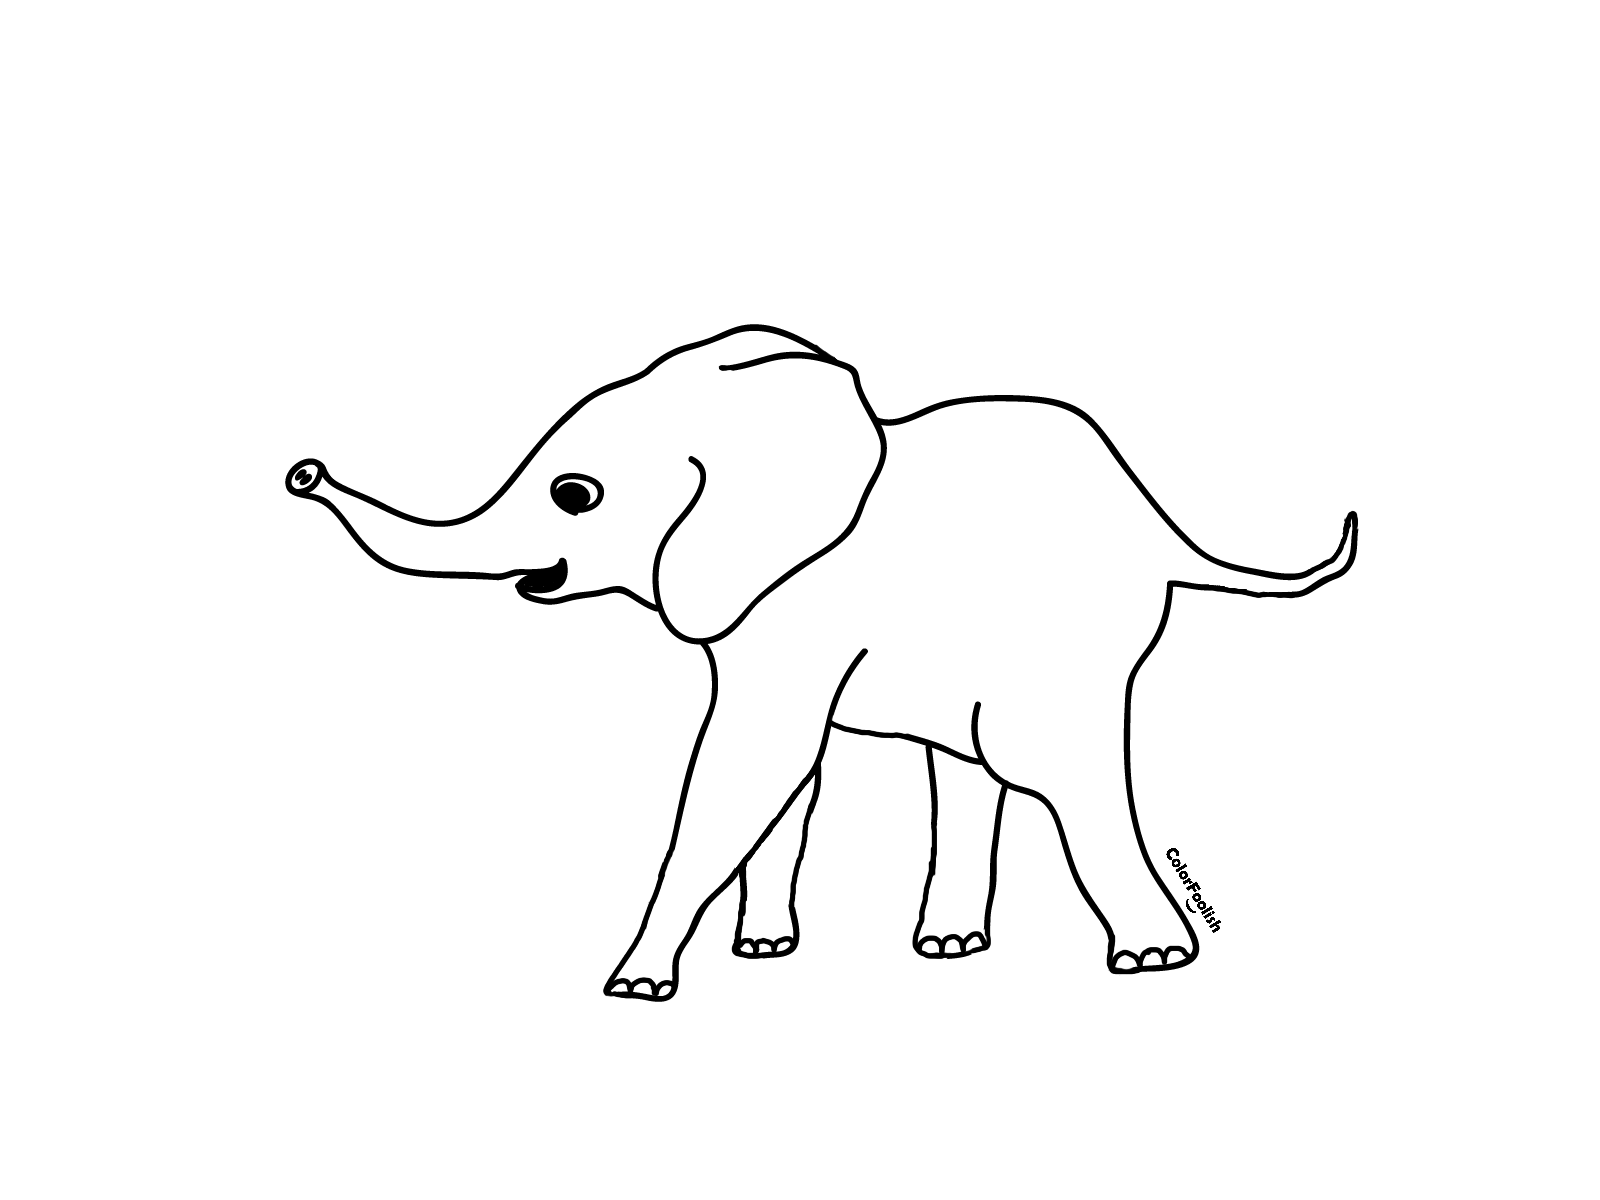 Coloring page of a young baby elephant